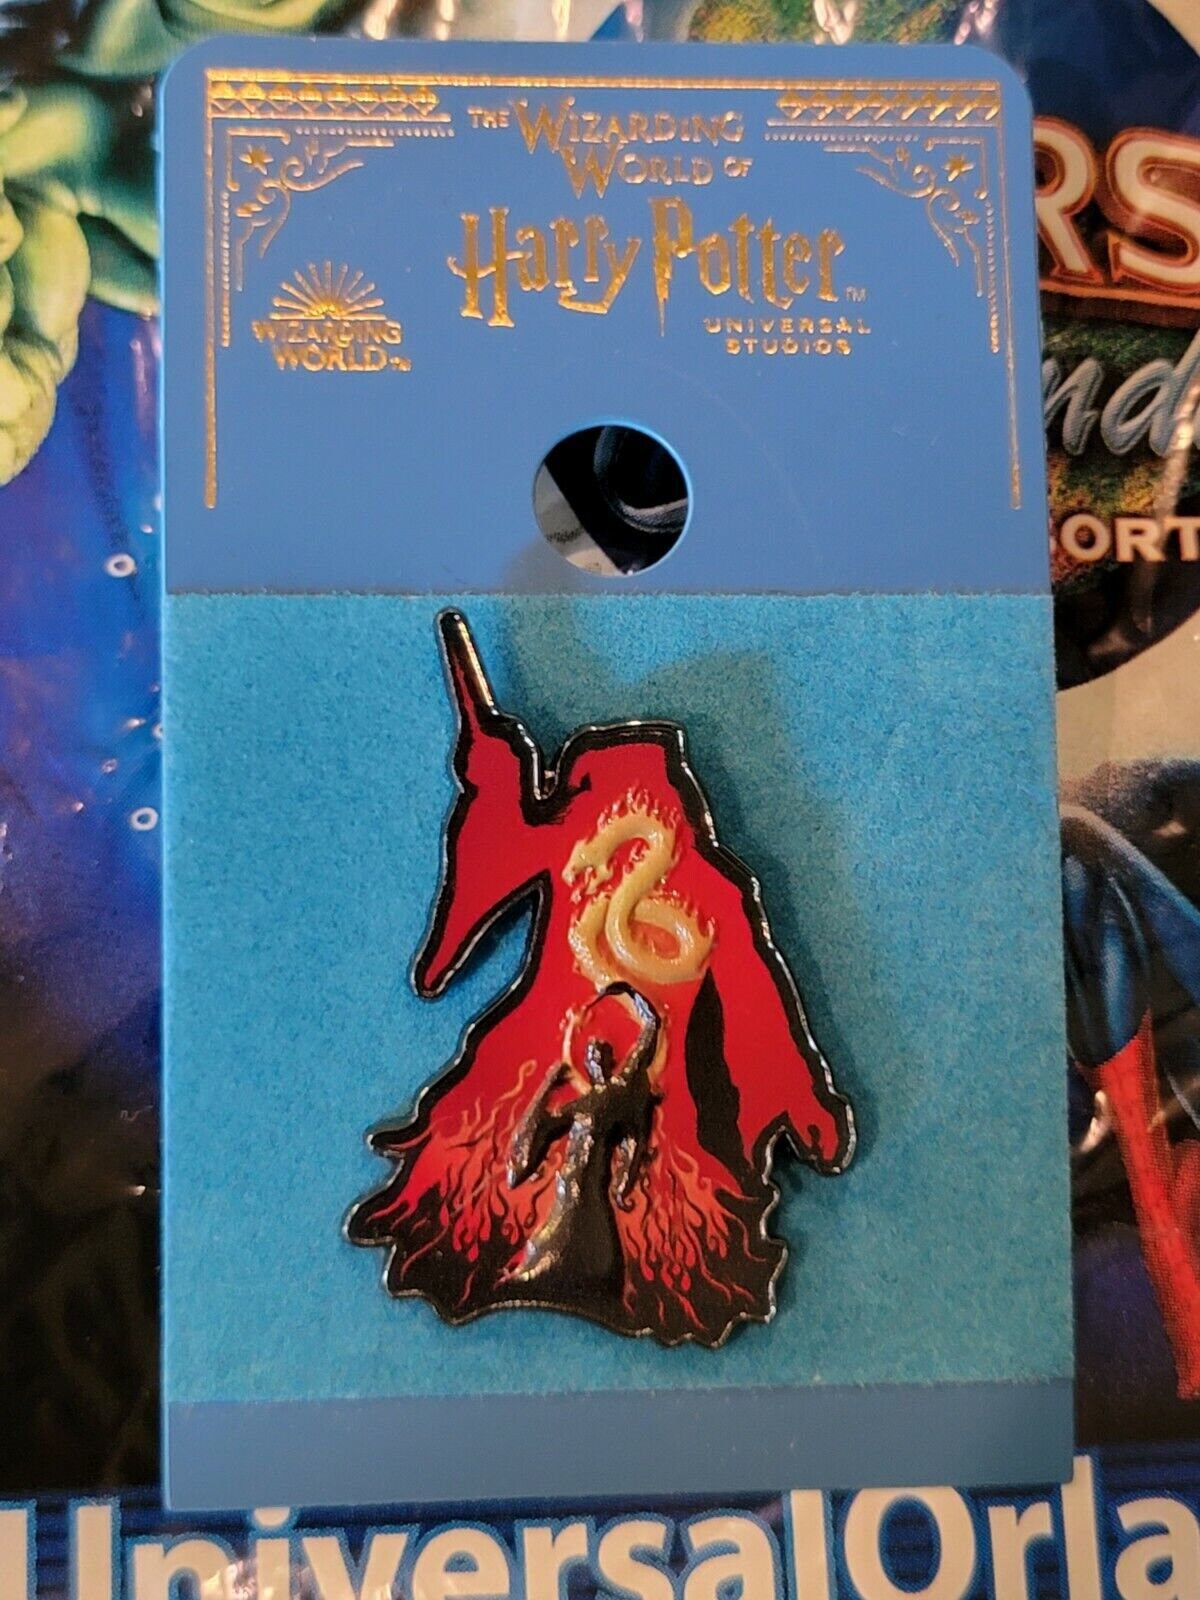 Dumbledore's Objects - the Latest Enamel Pins from Harry Potter Fan Club